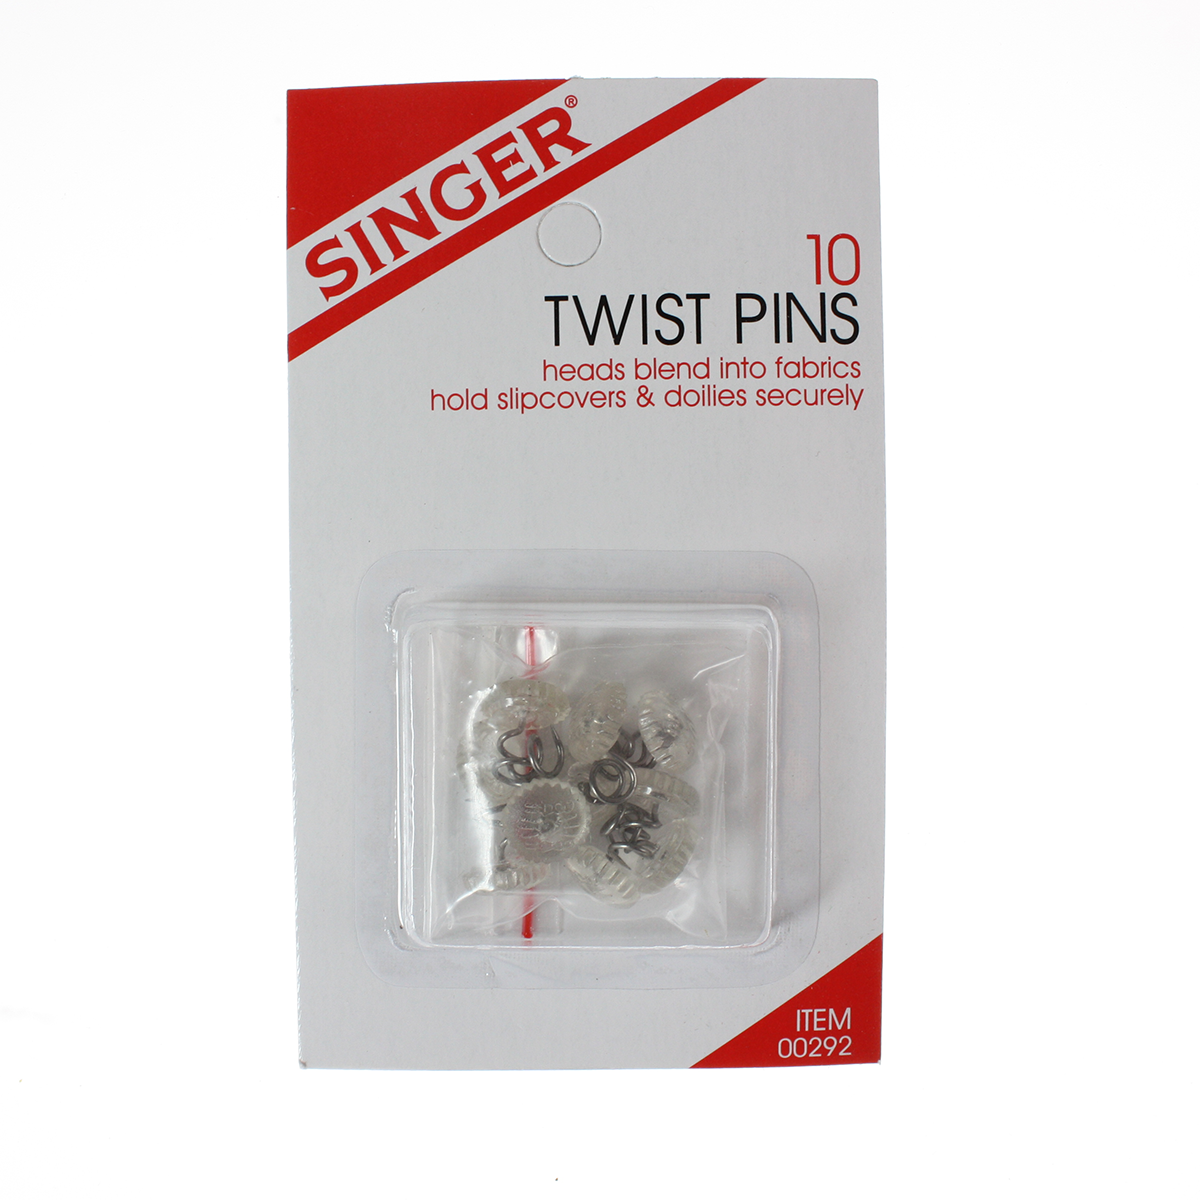 Singer Upholstery Twist Pins, 10pk (Case of 48)*